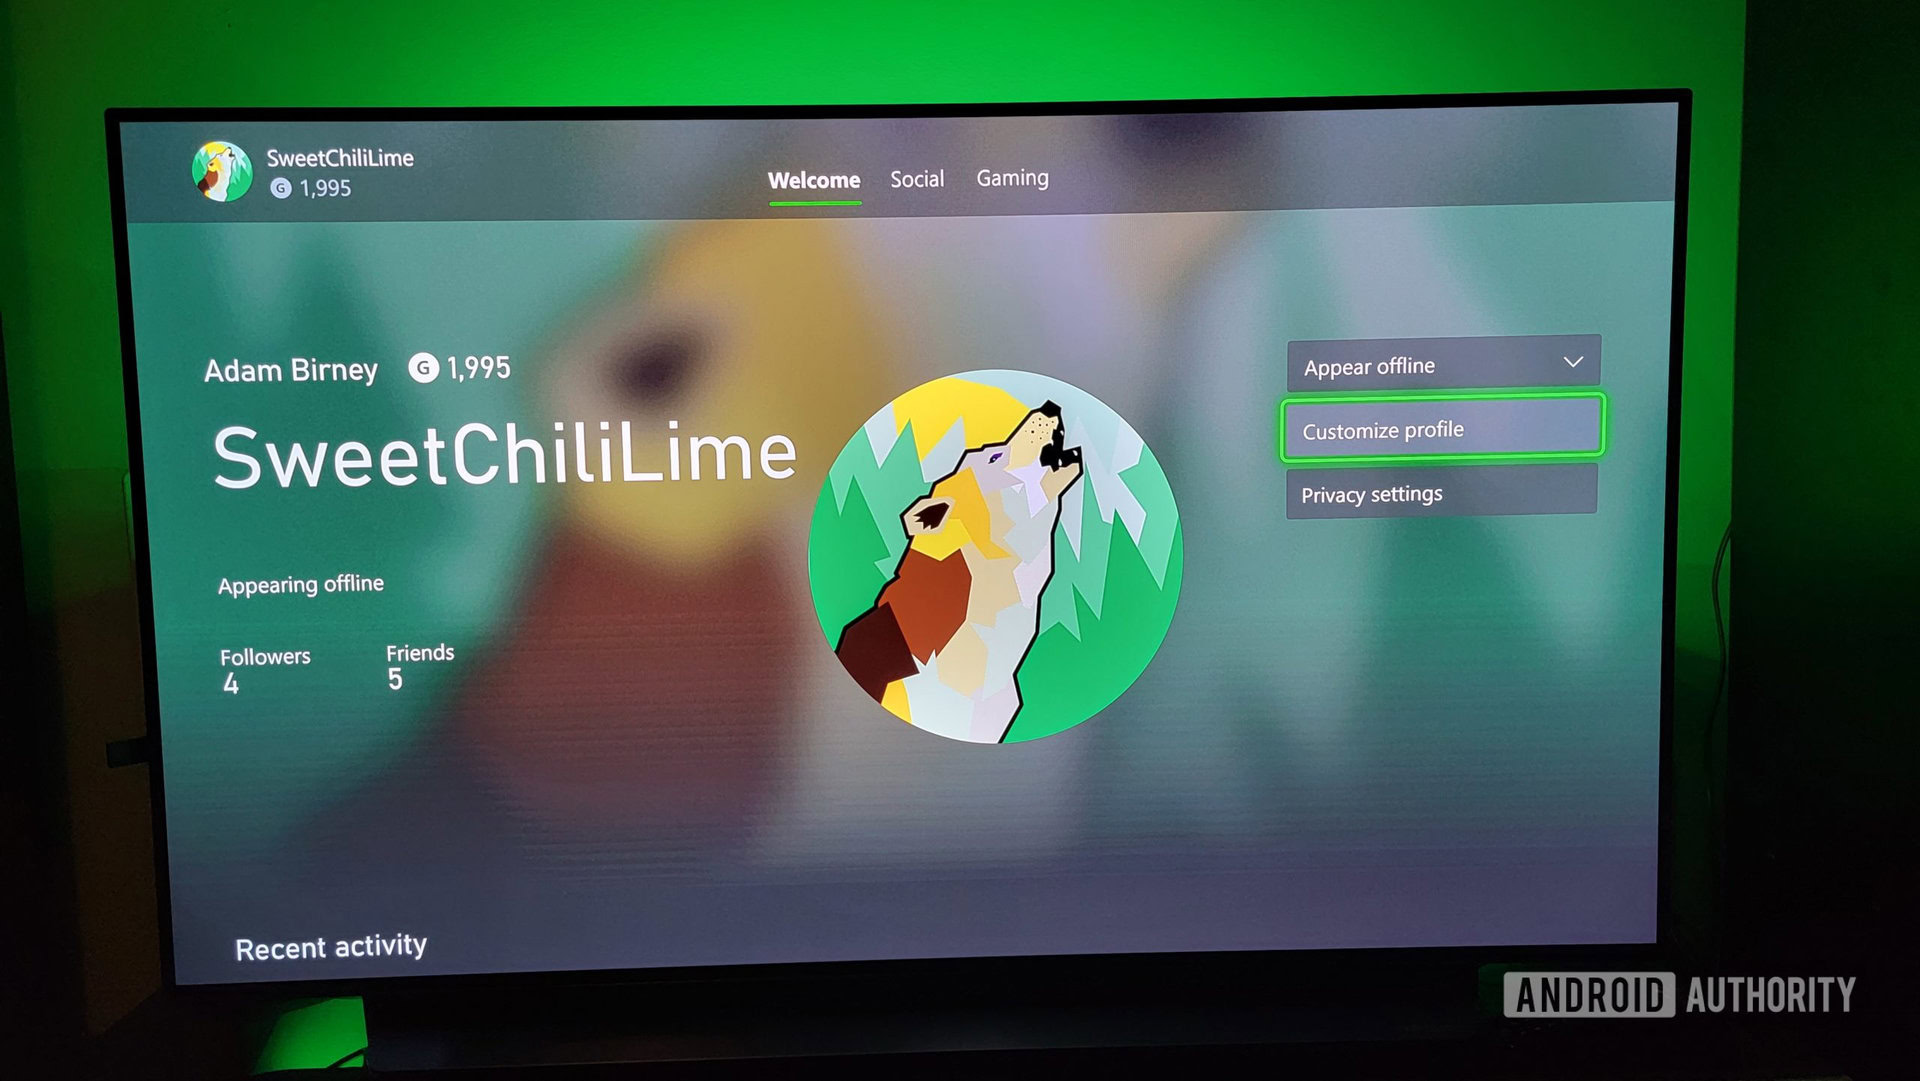 How to Appear Offline on an Xbox One With Privacy Settings